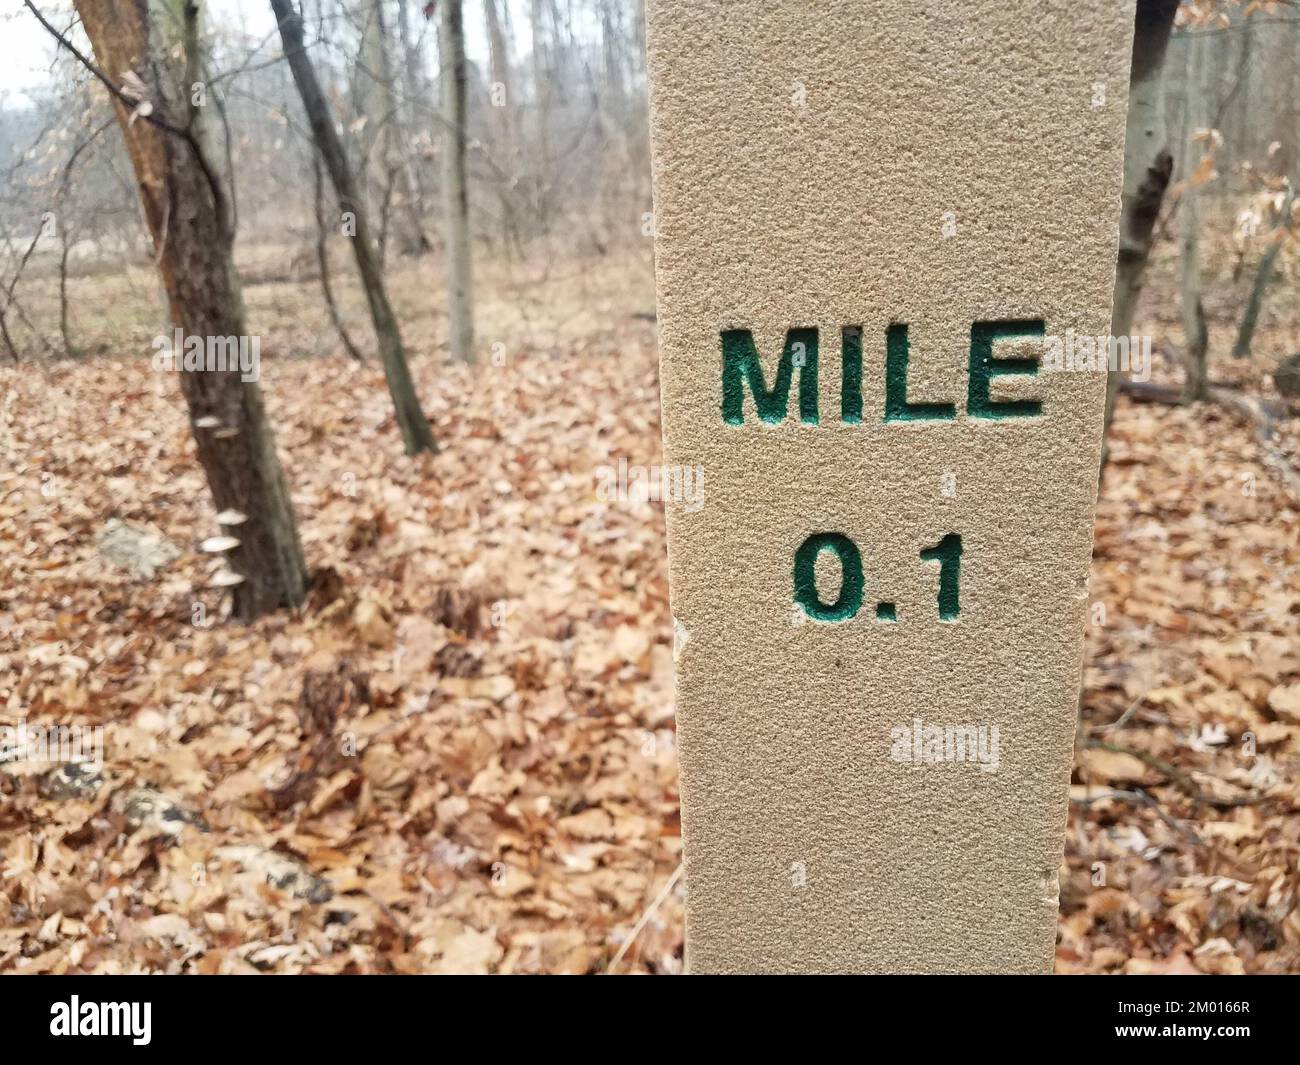 0. 1 mile marker post in forest or woods with fallen leaves. Stock Photo